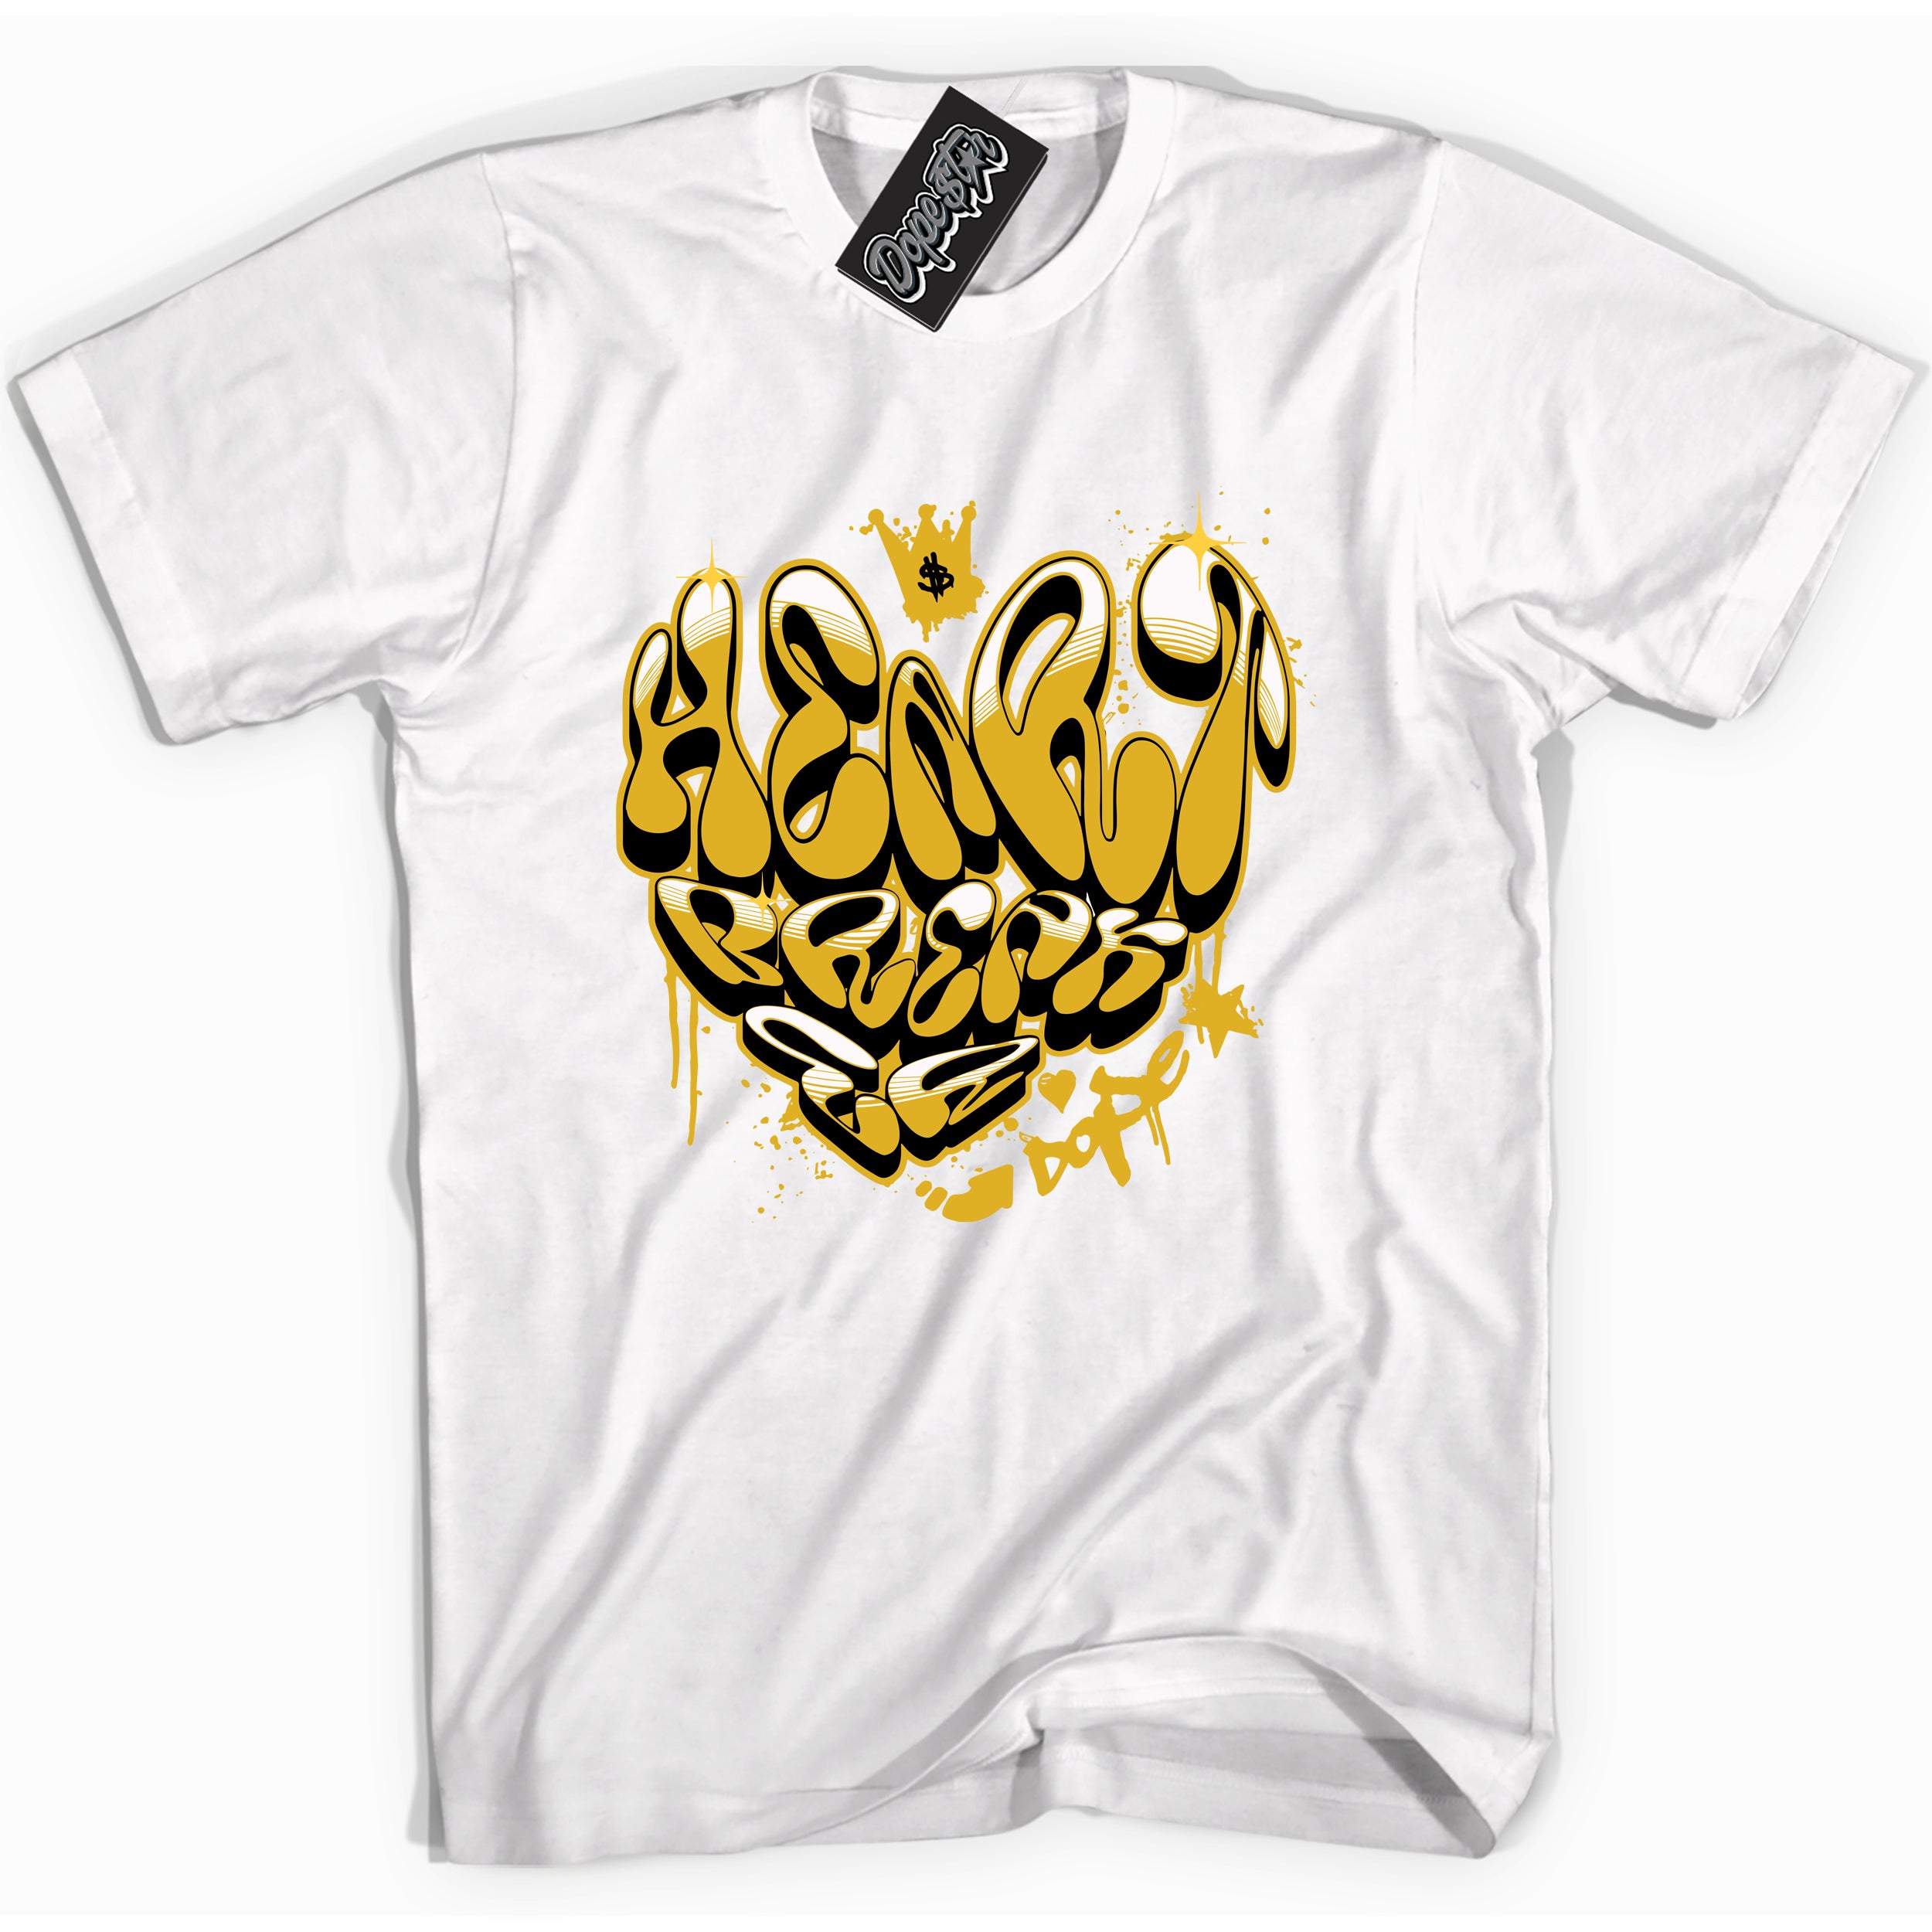 Cool White Shirt with “ Heartbreaker Graffiti” design that perfectly matches Yellow Ochre 6s Sneakers.